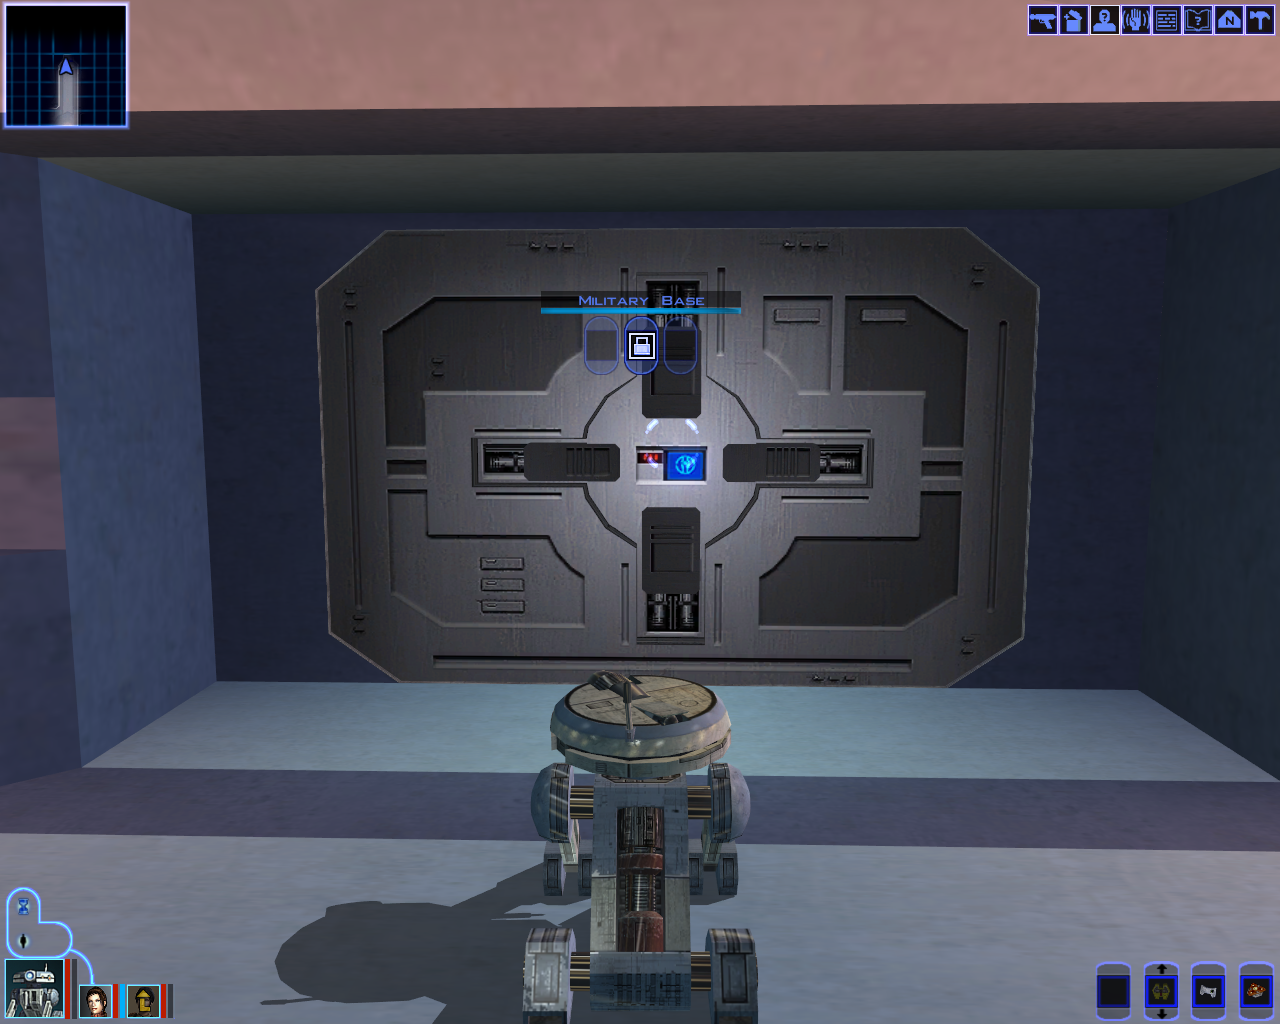 T3-M4 Opening door to sith base